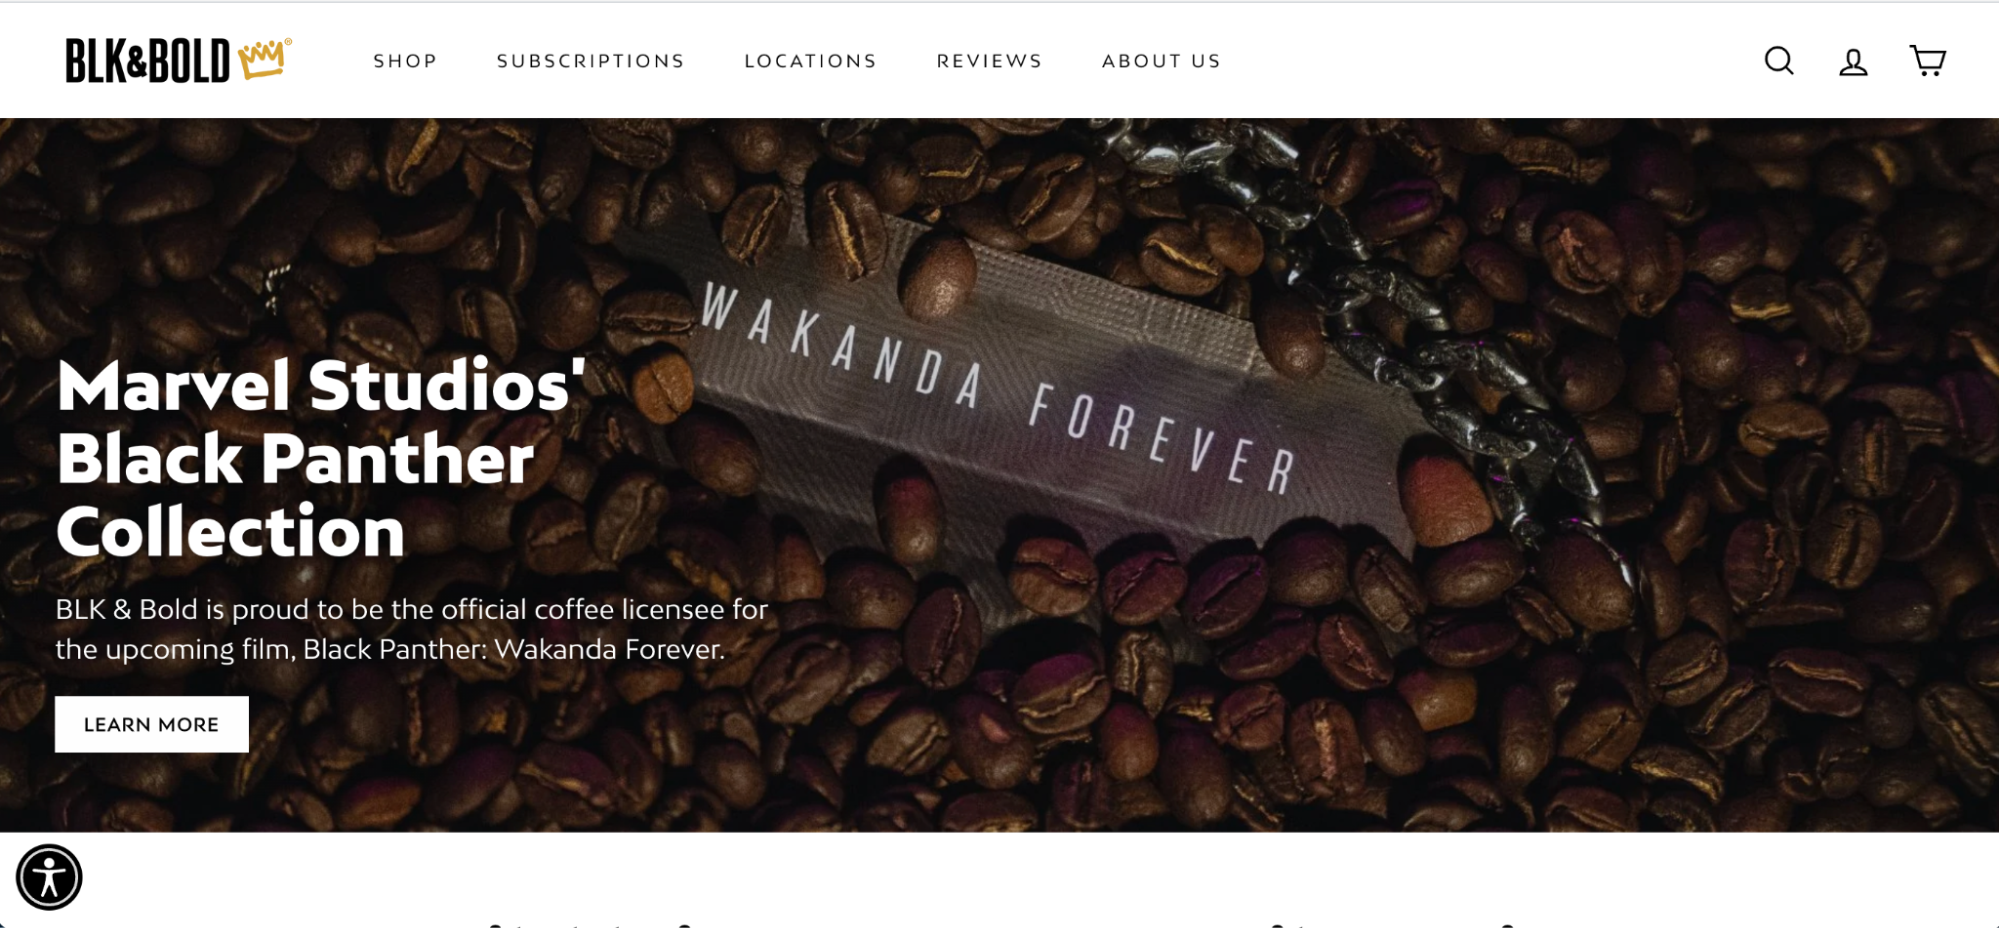 BLK & Bold coffee ecommerce website, featuring a hero image of their Marvel Studios’ coffee beans